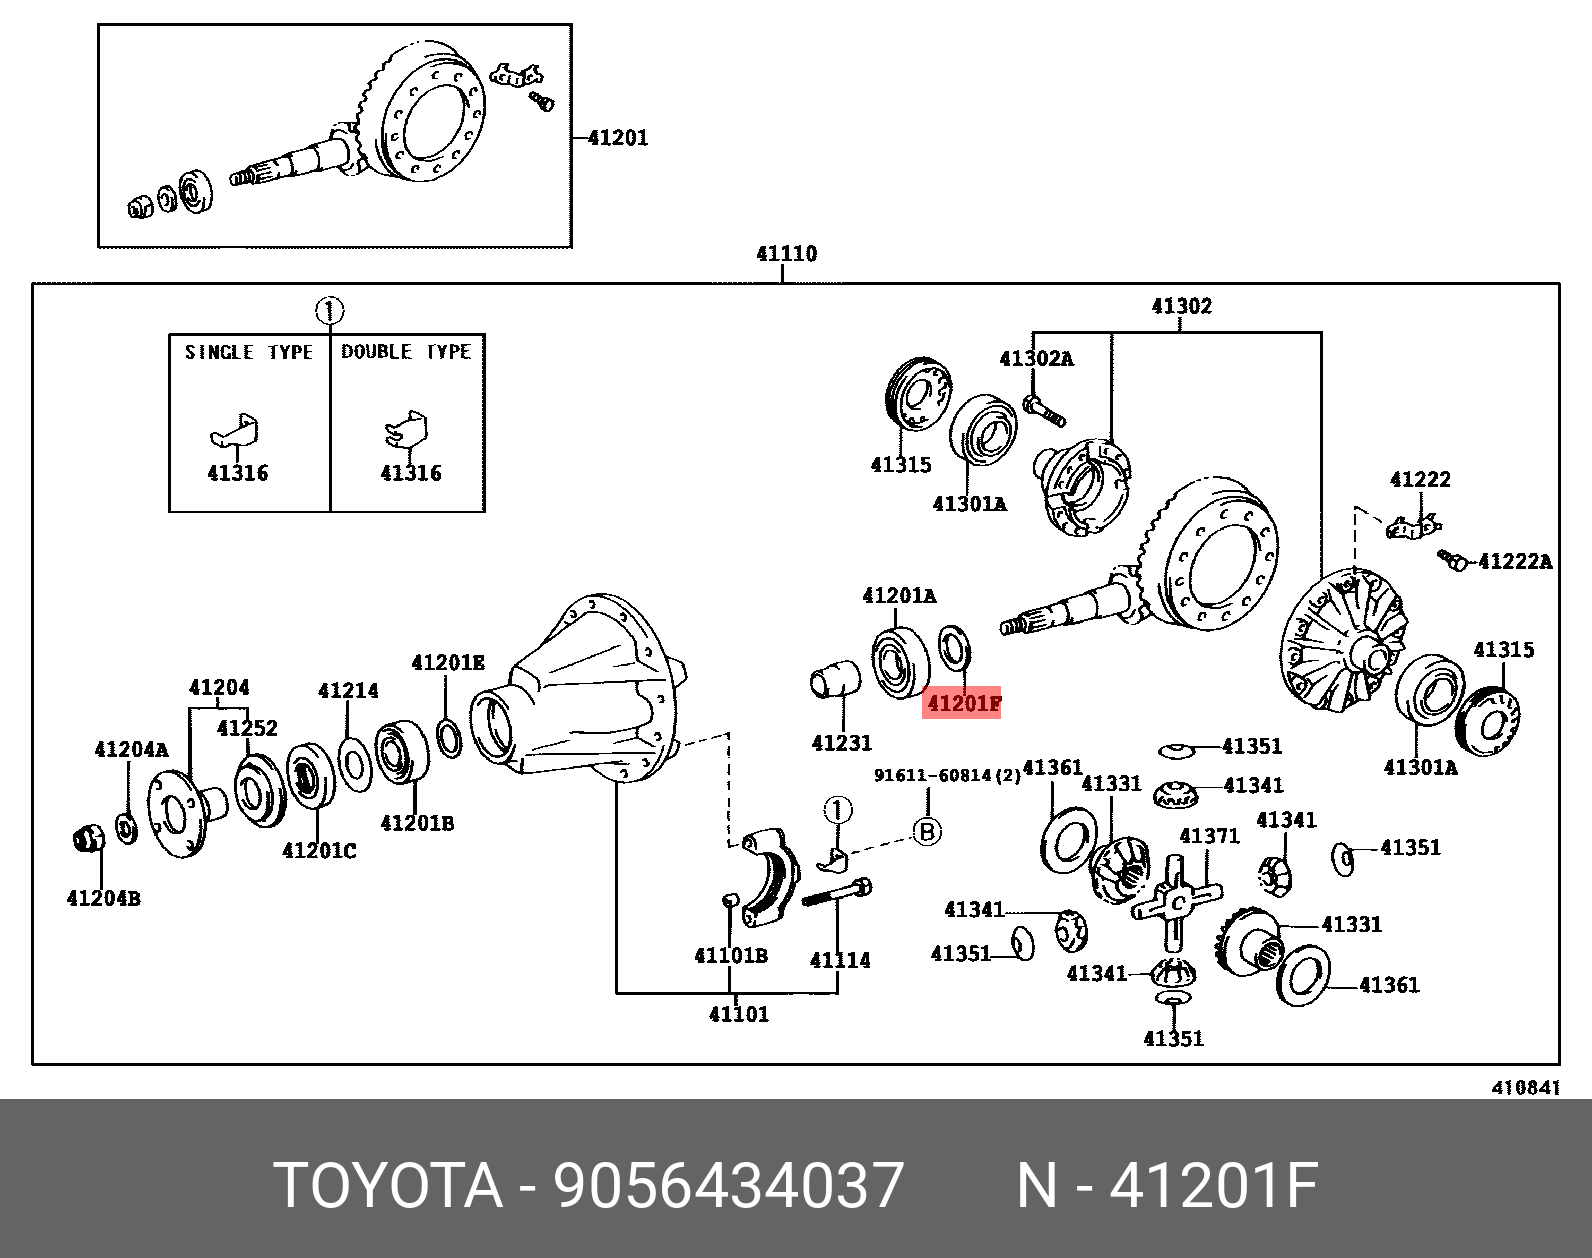 9056434037, HARRIER 199712-200302, ACU1#, MCU1#, SXU1#, WASHER, PLATE (FOR REAR DIFFERENTIAL DRIVE PINION)